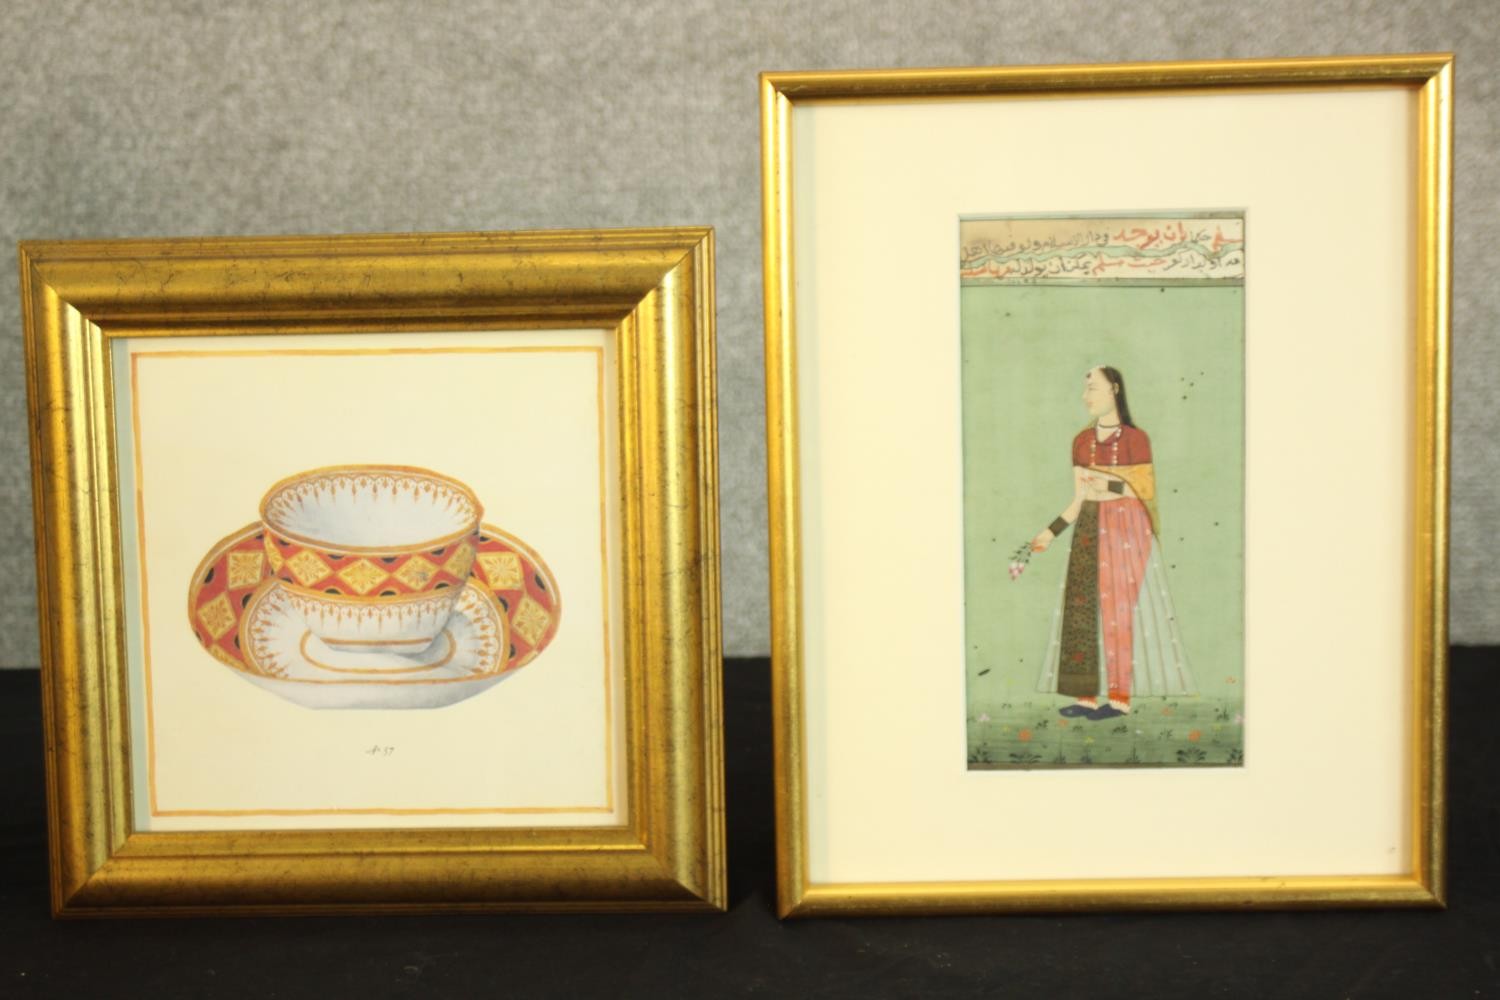 A print and 19th century Indo-Persian gouache on paper of a female figure in traditional clothing.